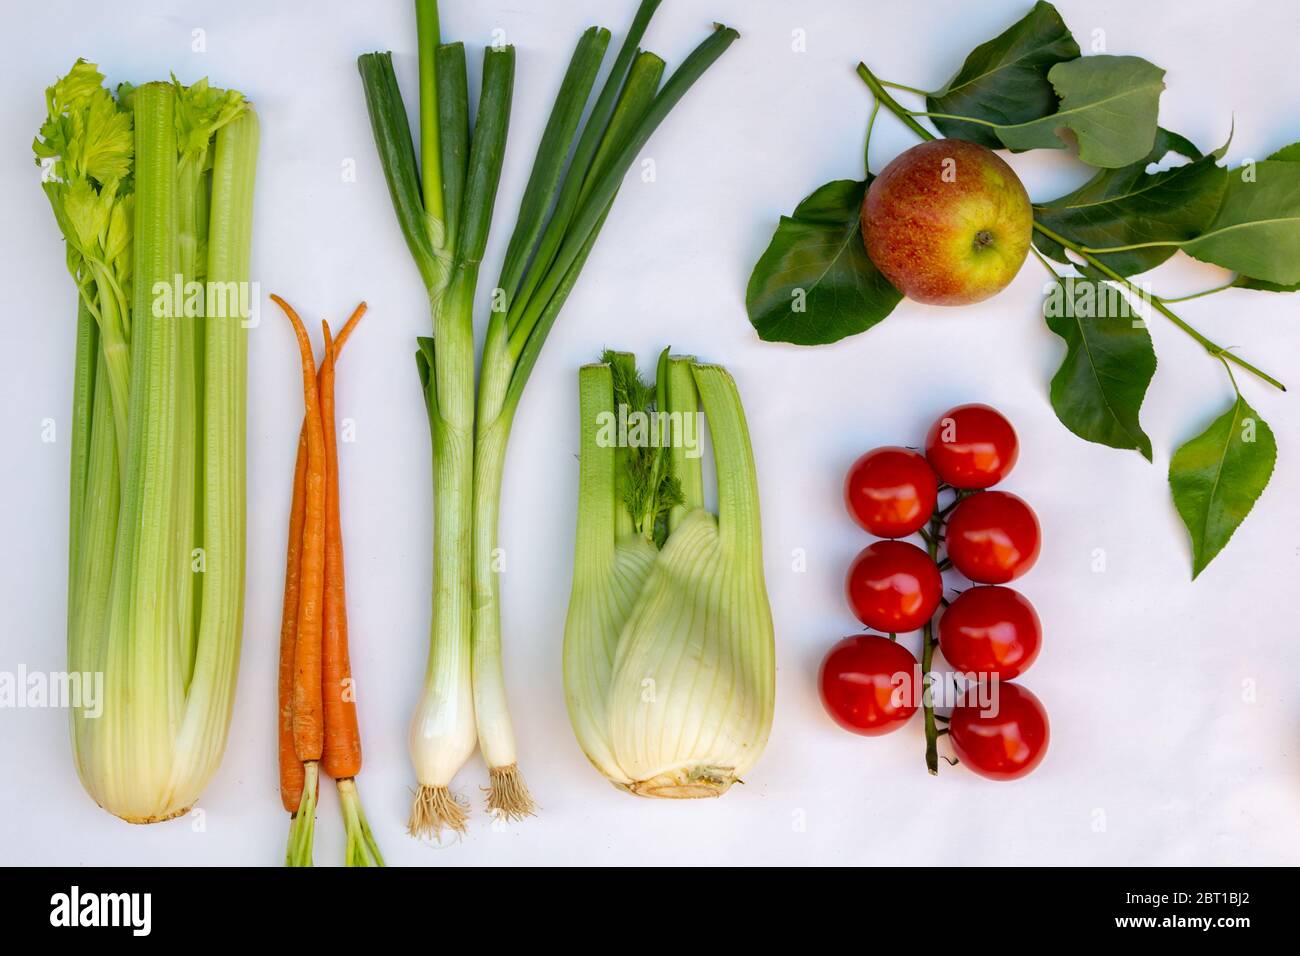 Flat lay with different kinds of fresh local vegetables en fruits like, celery, spring onion, tomato, apple, zucchini, chicory and fennel Stock Photo